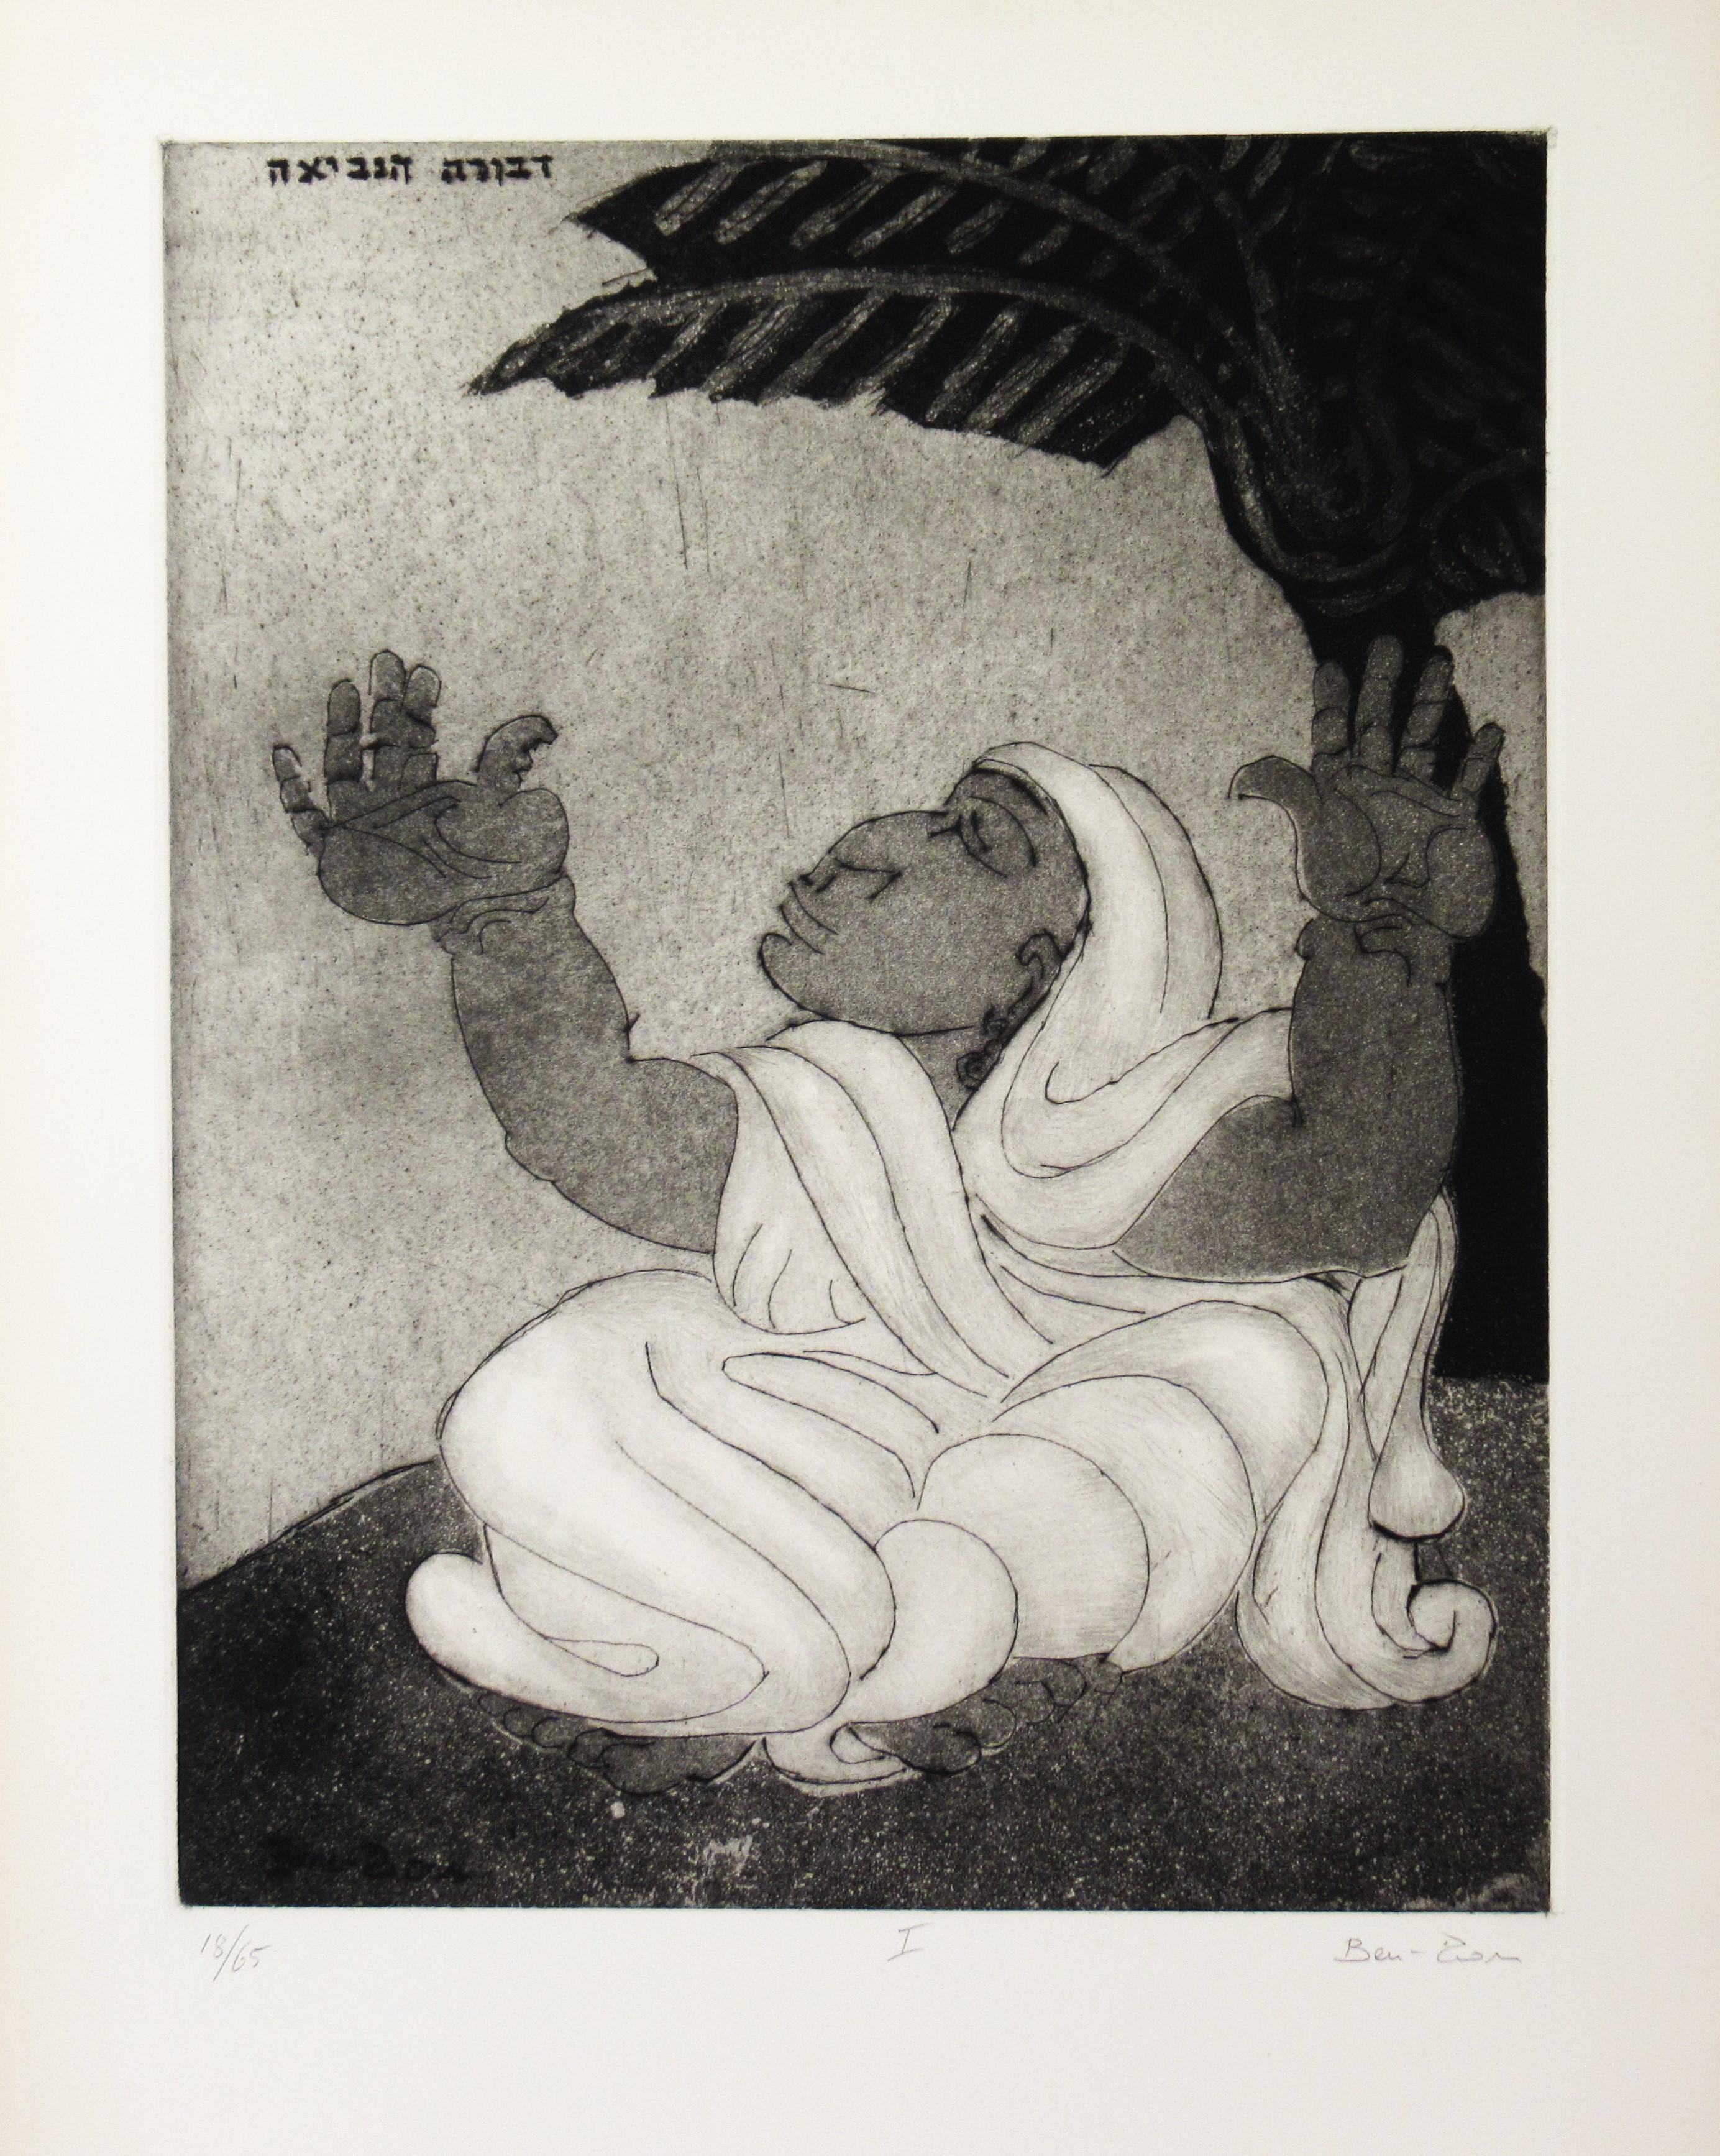 Ben Zion Weinman Print - "And Deborah, A Prophet" From the suite "Judges and Kings"